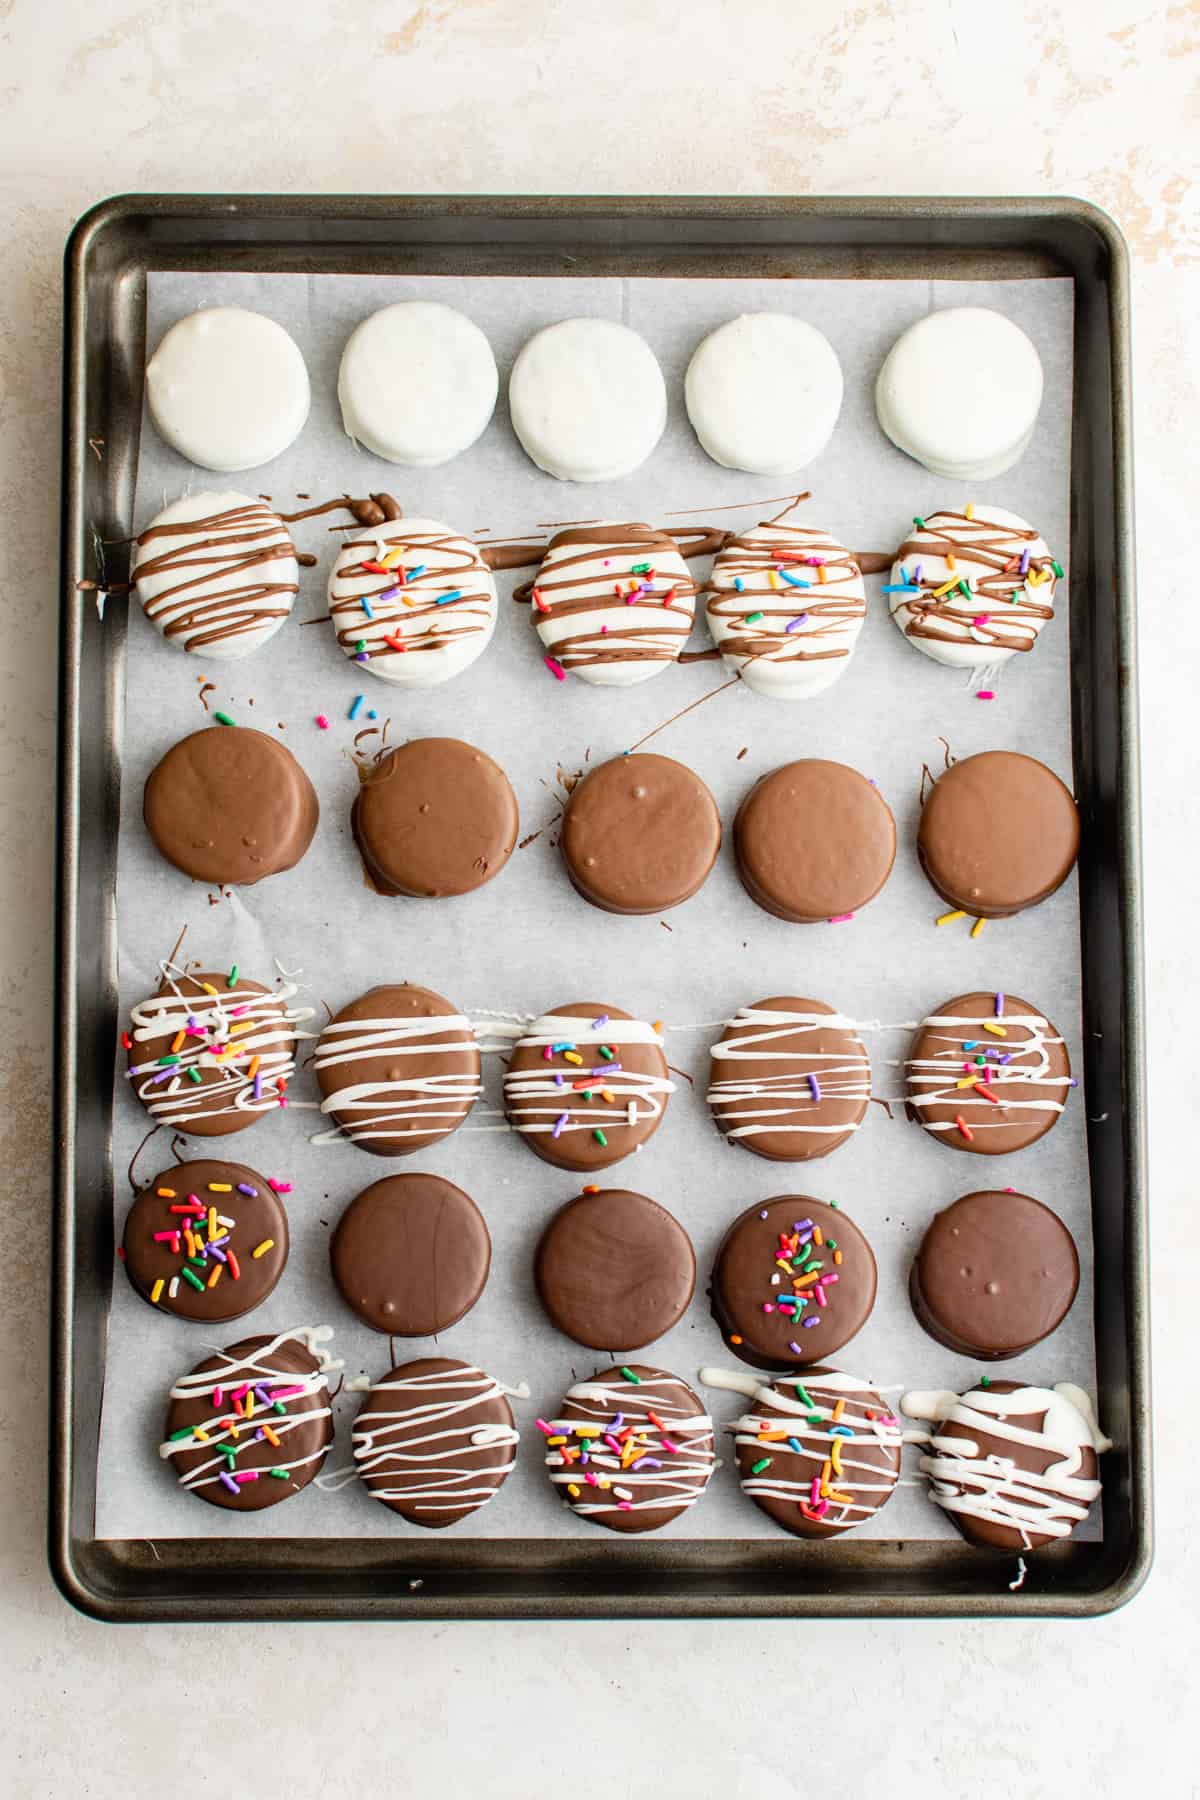 chocolate covered Oreos lined up on a baking tray; some are white chocolate, some are dark chocolate, some are milk chocolate; some are plain, some are drizzled with more chocolate, some have sprinkles